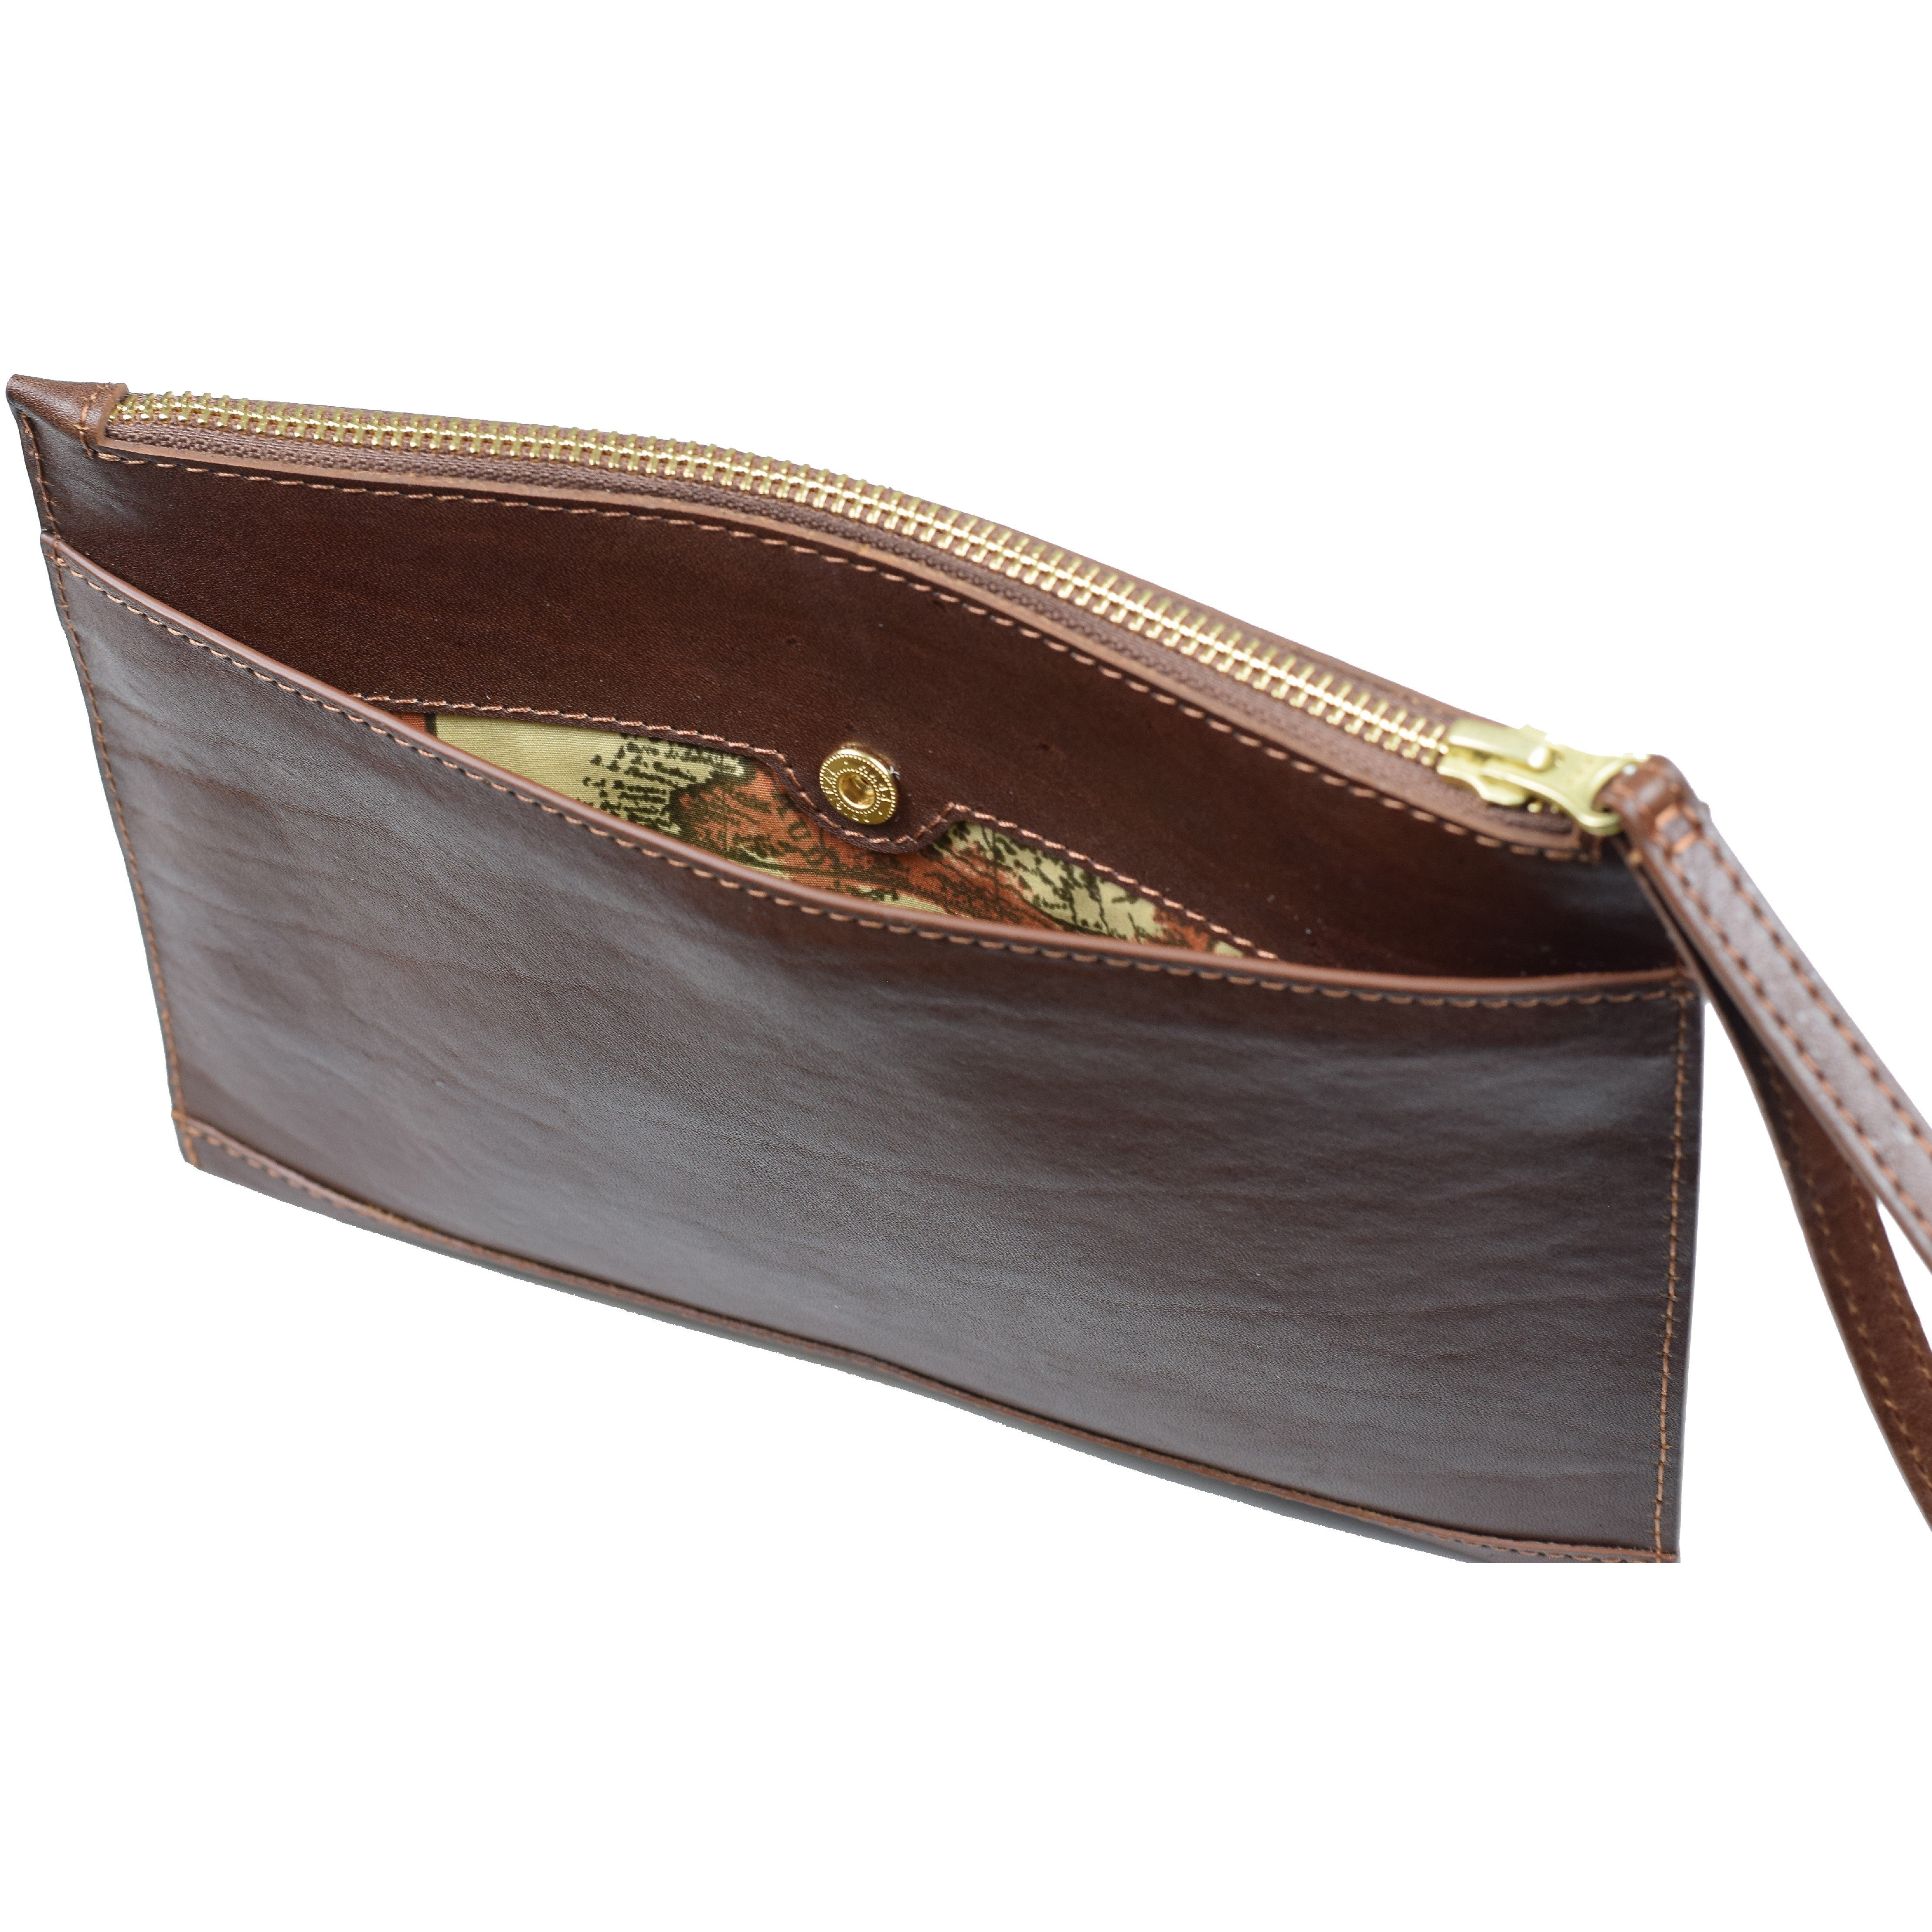 Limited All Day Wristlet - LAND Leather Goods